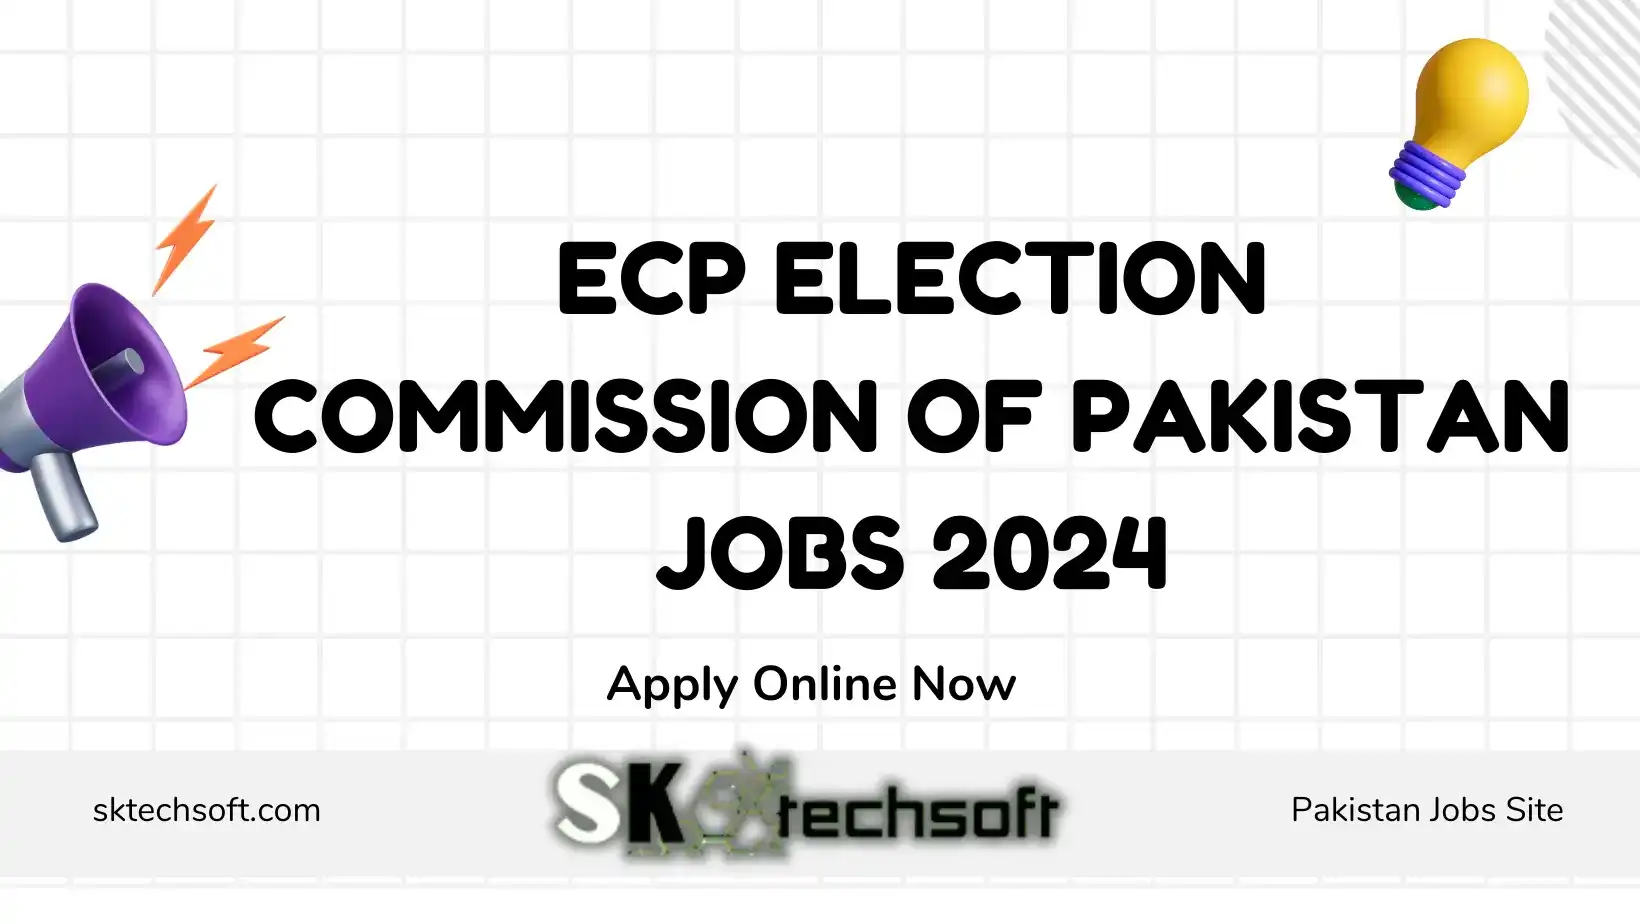 ECP Election Commission of Pakistan Jobs